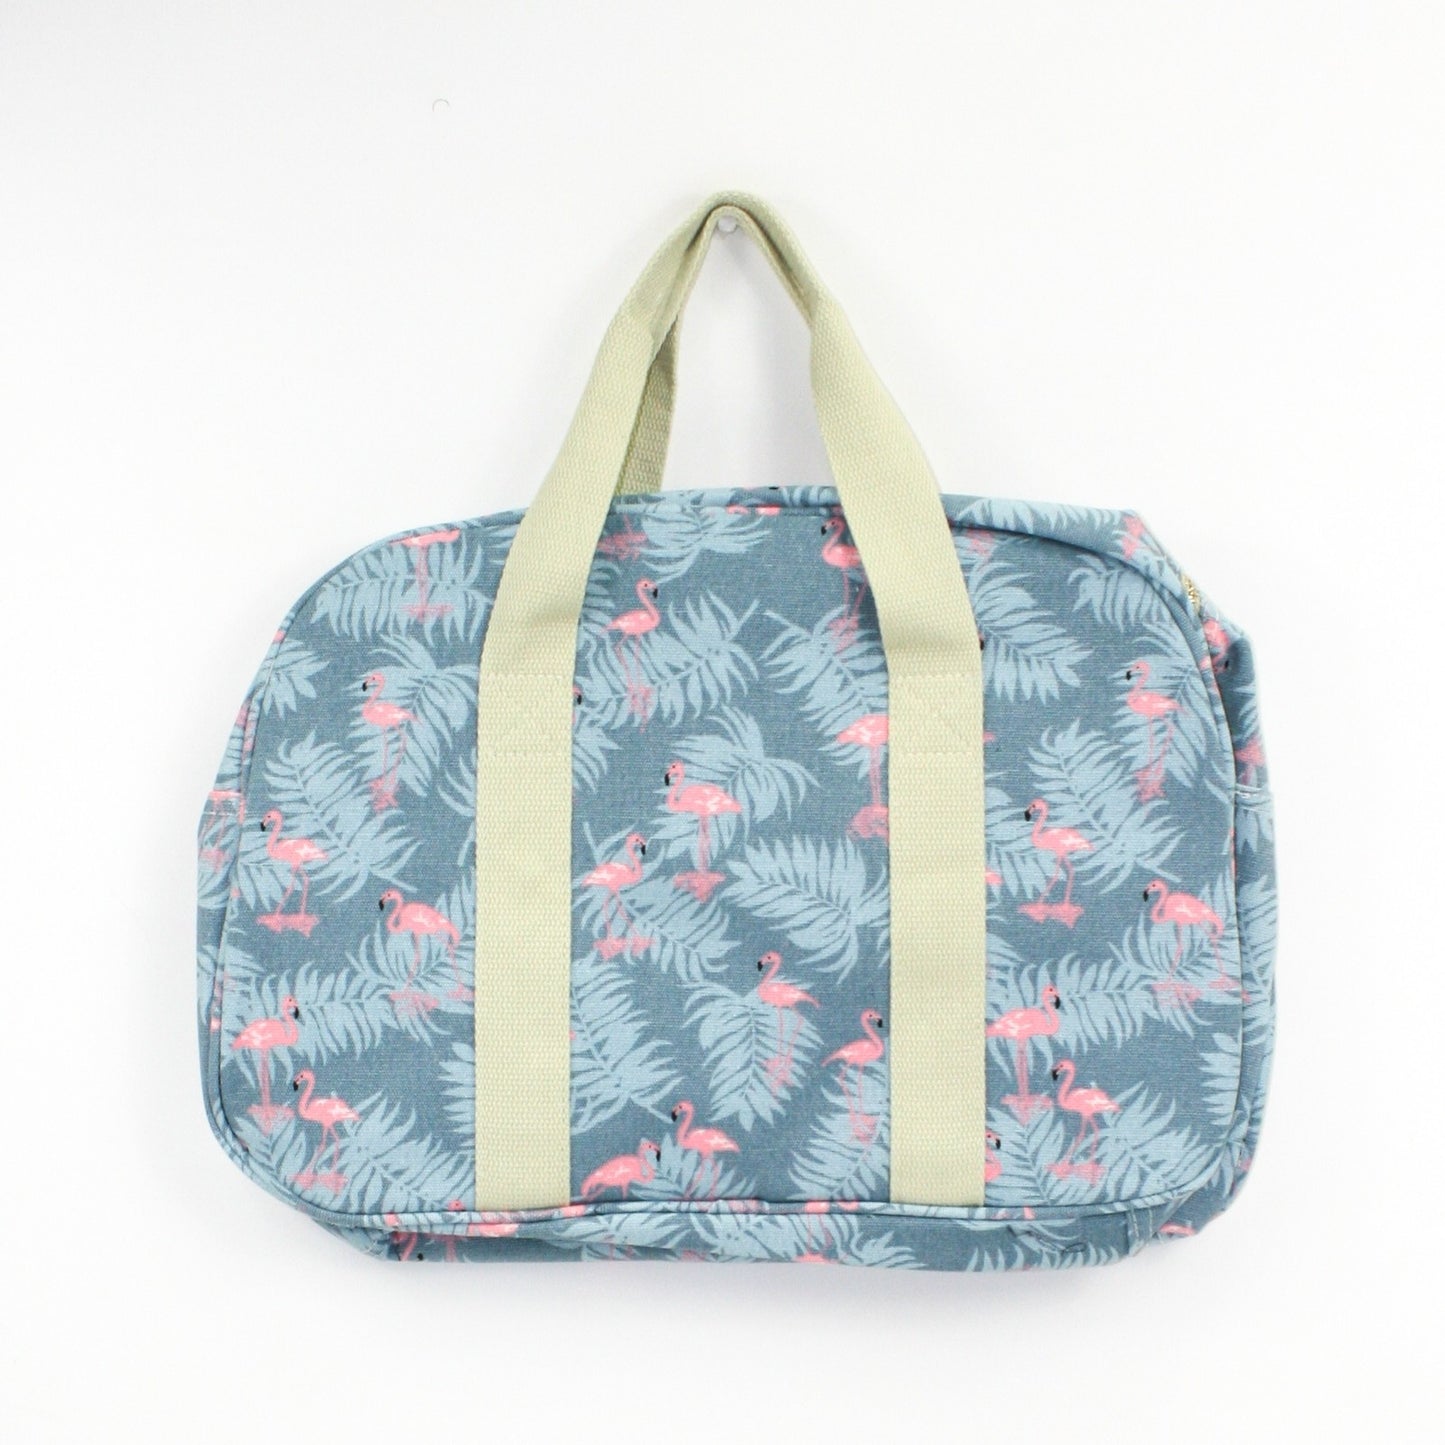 Tropical flamingo design print weekend bag on a solid blue coloured background.